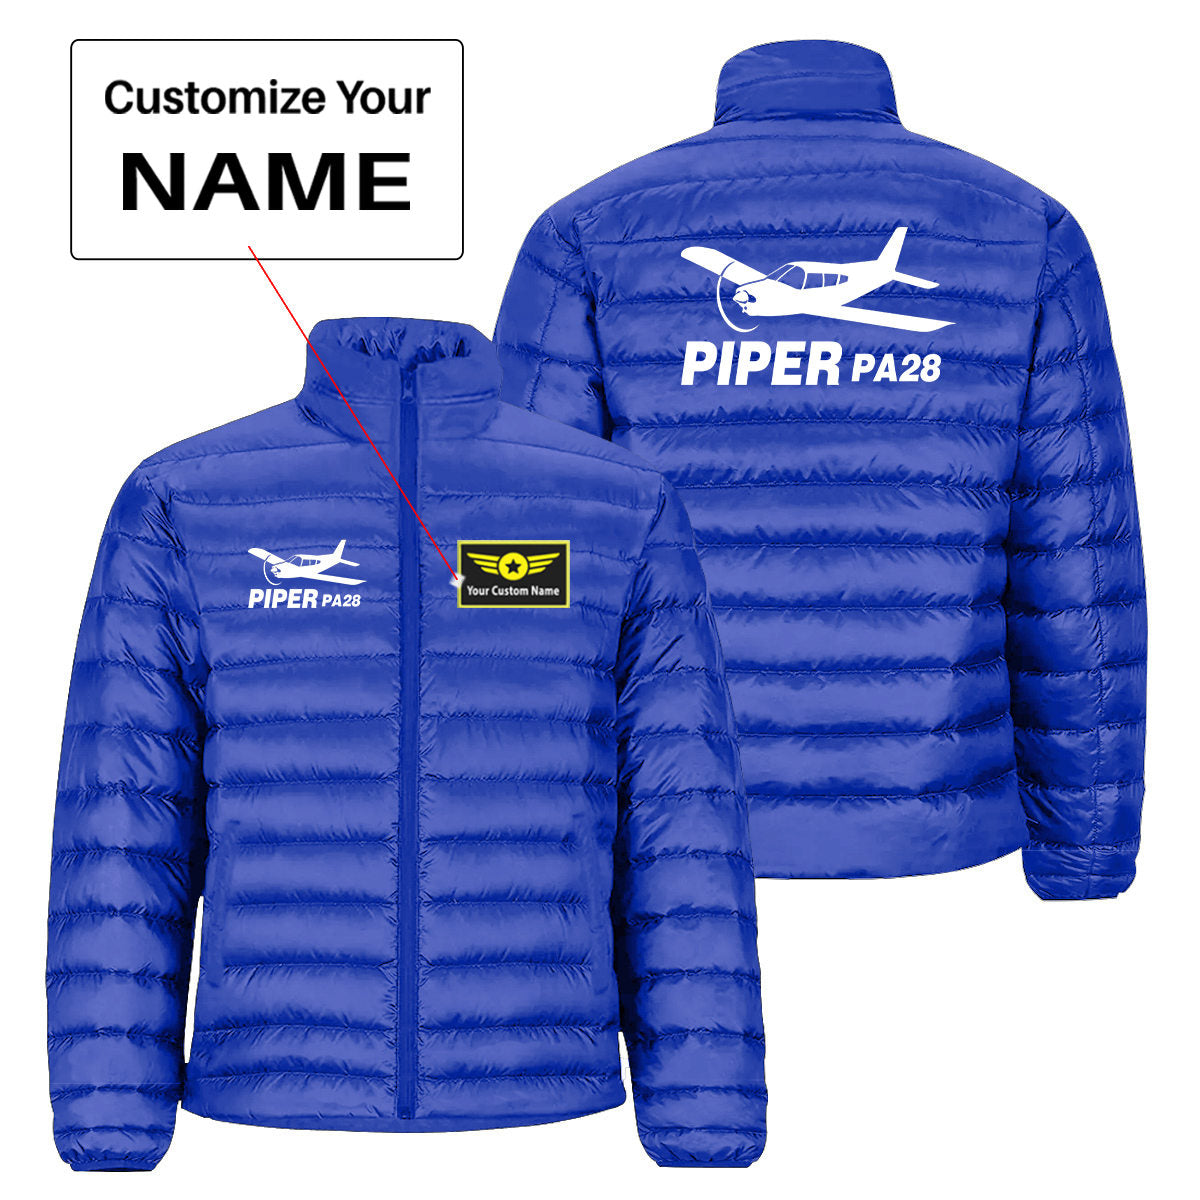 The Piper PA28 Designed Padded Jackets